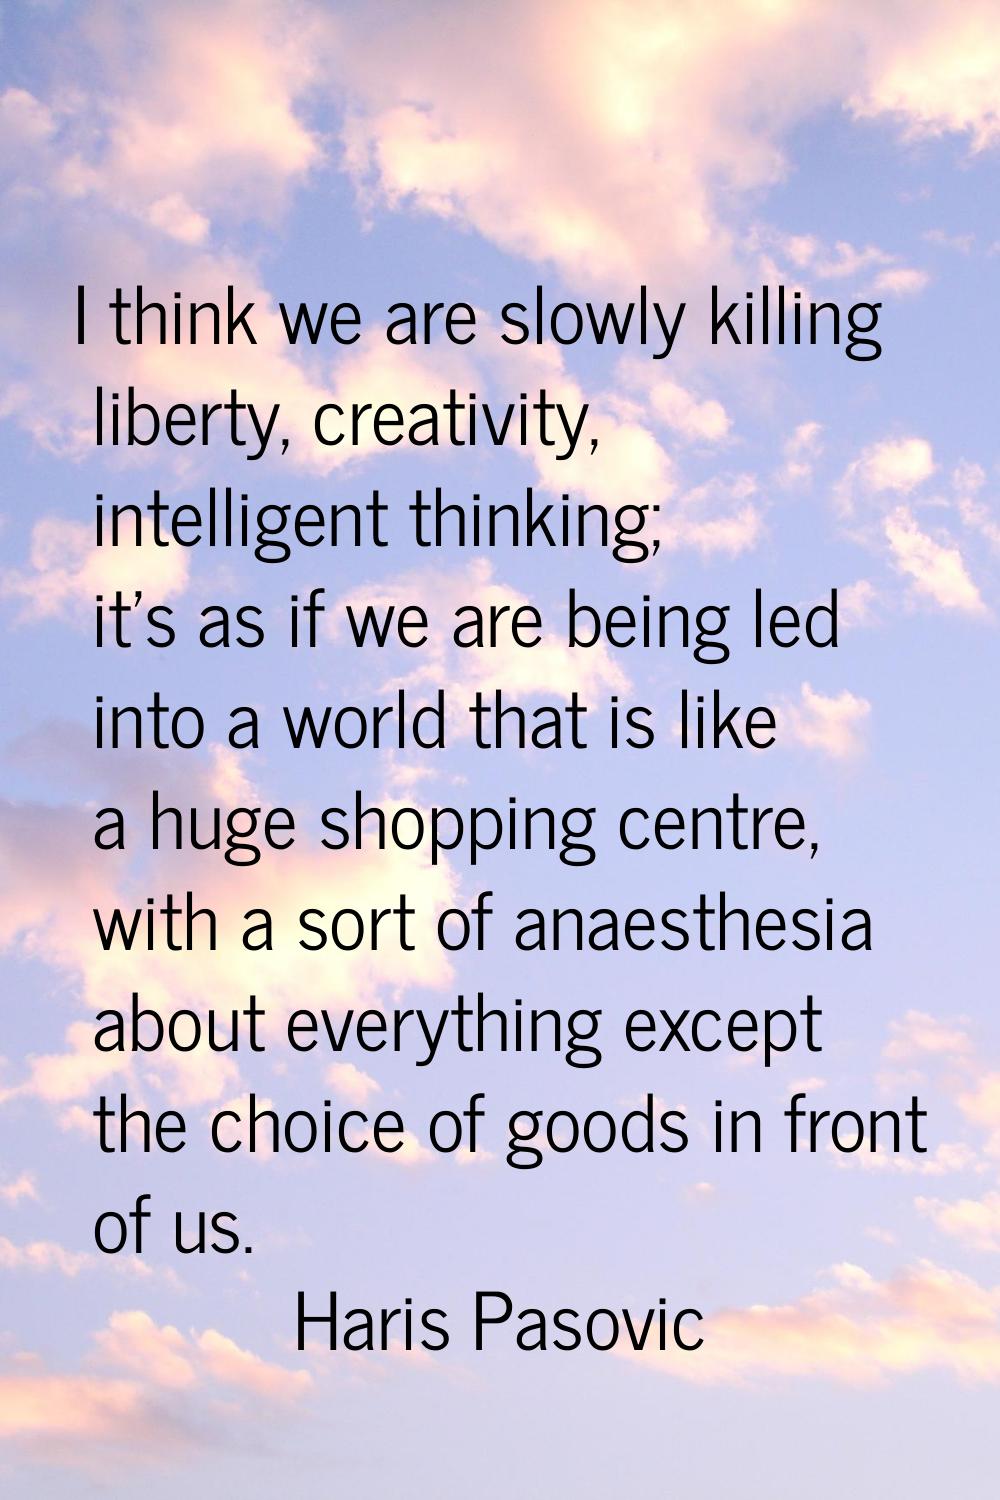 I think we are slowly killing liberty, creativity, intelligent thinking; it's as if we are being le